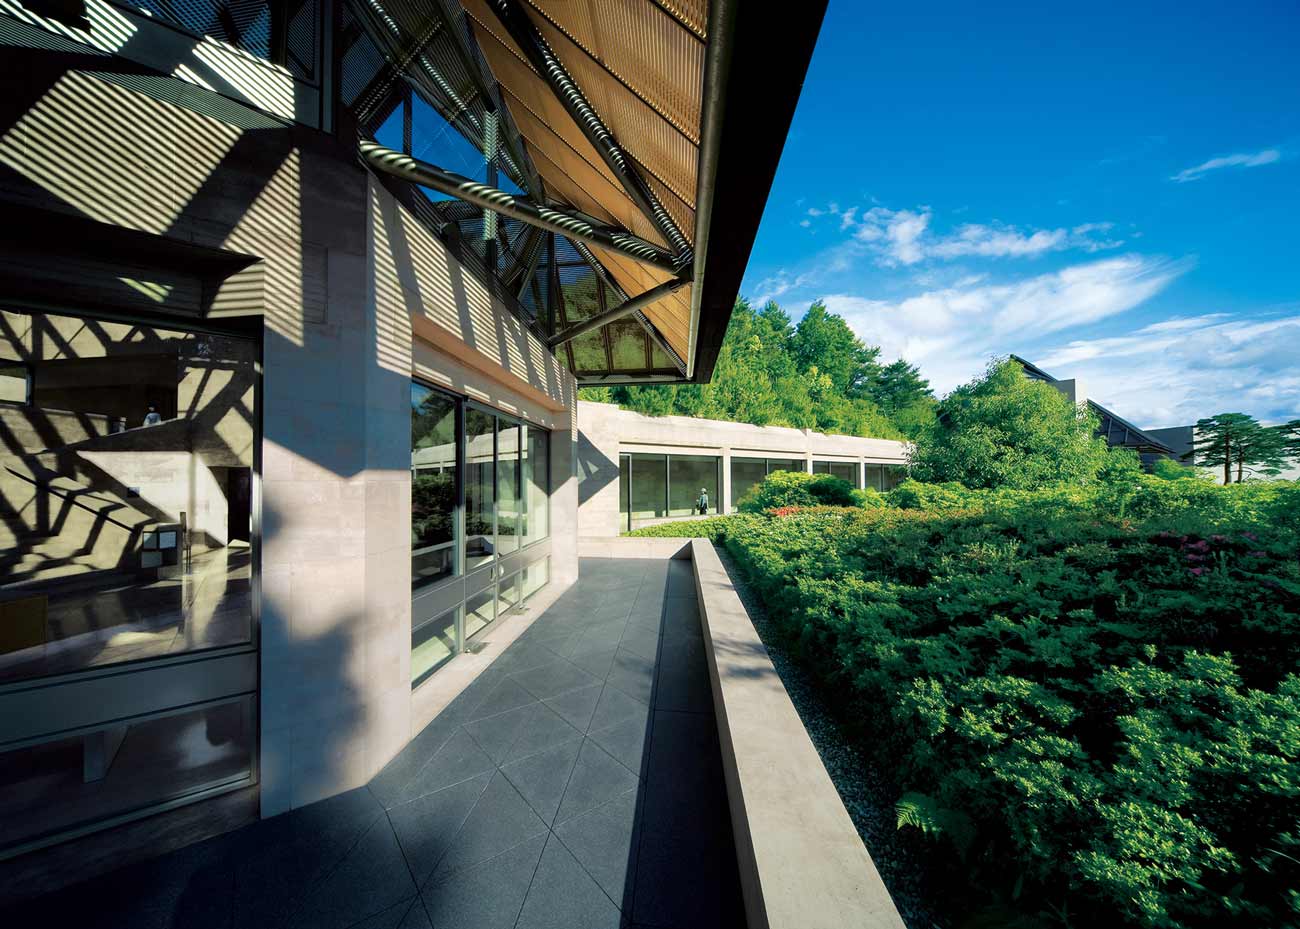 Excursions Japan - The Miho Museum in Koka, Shiga Prefecture, was